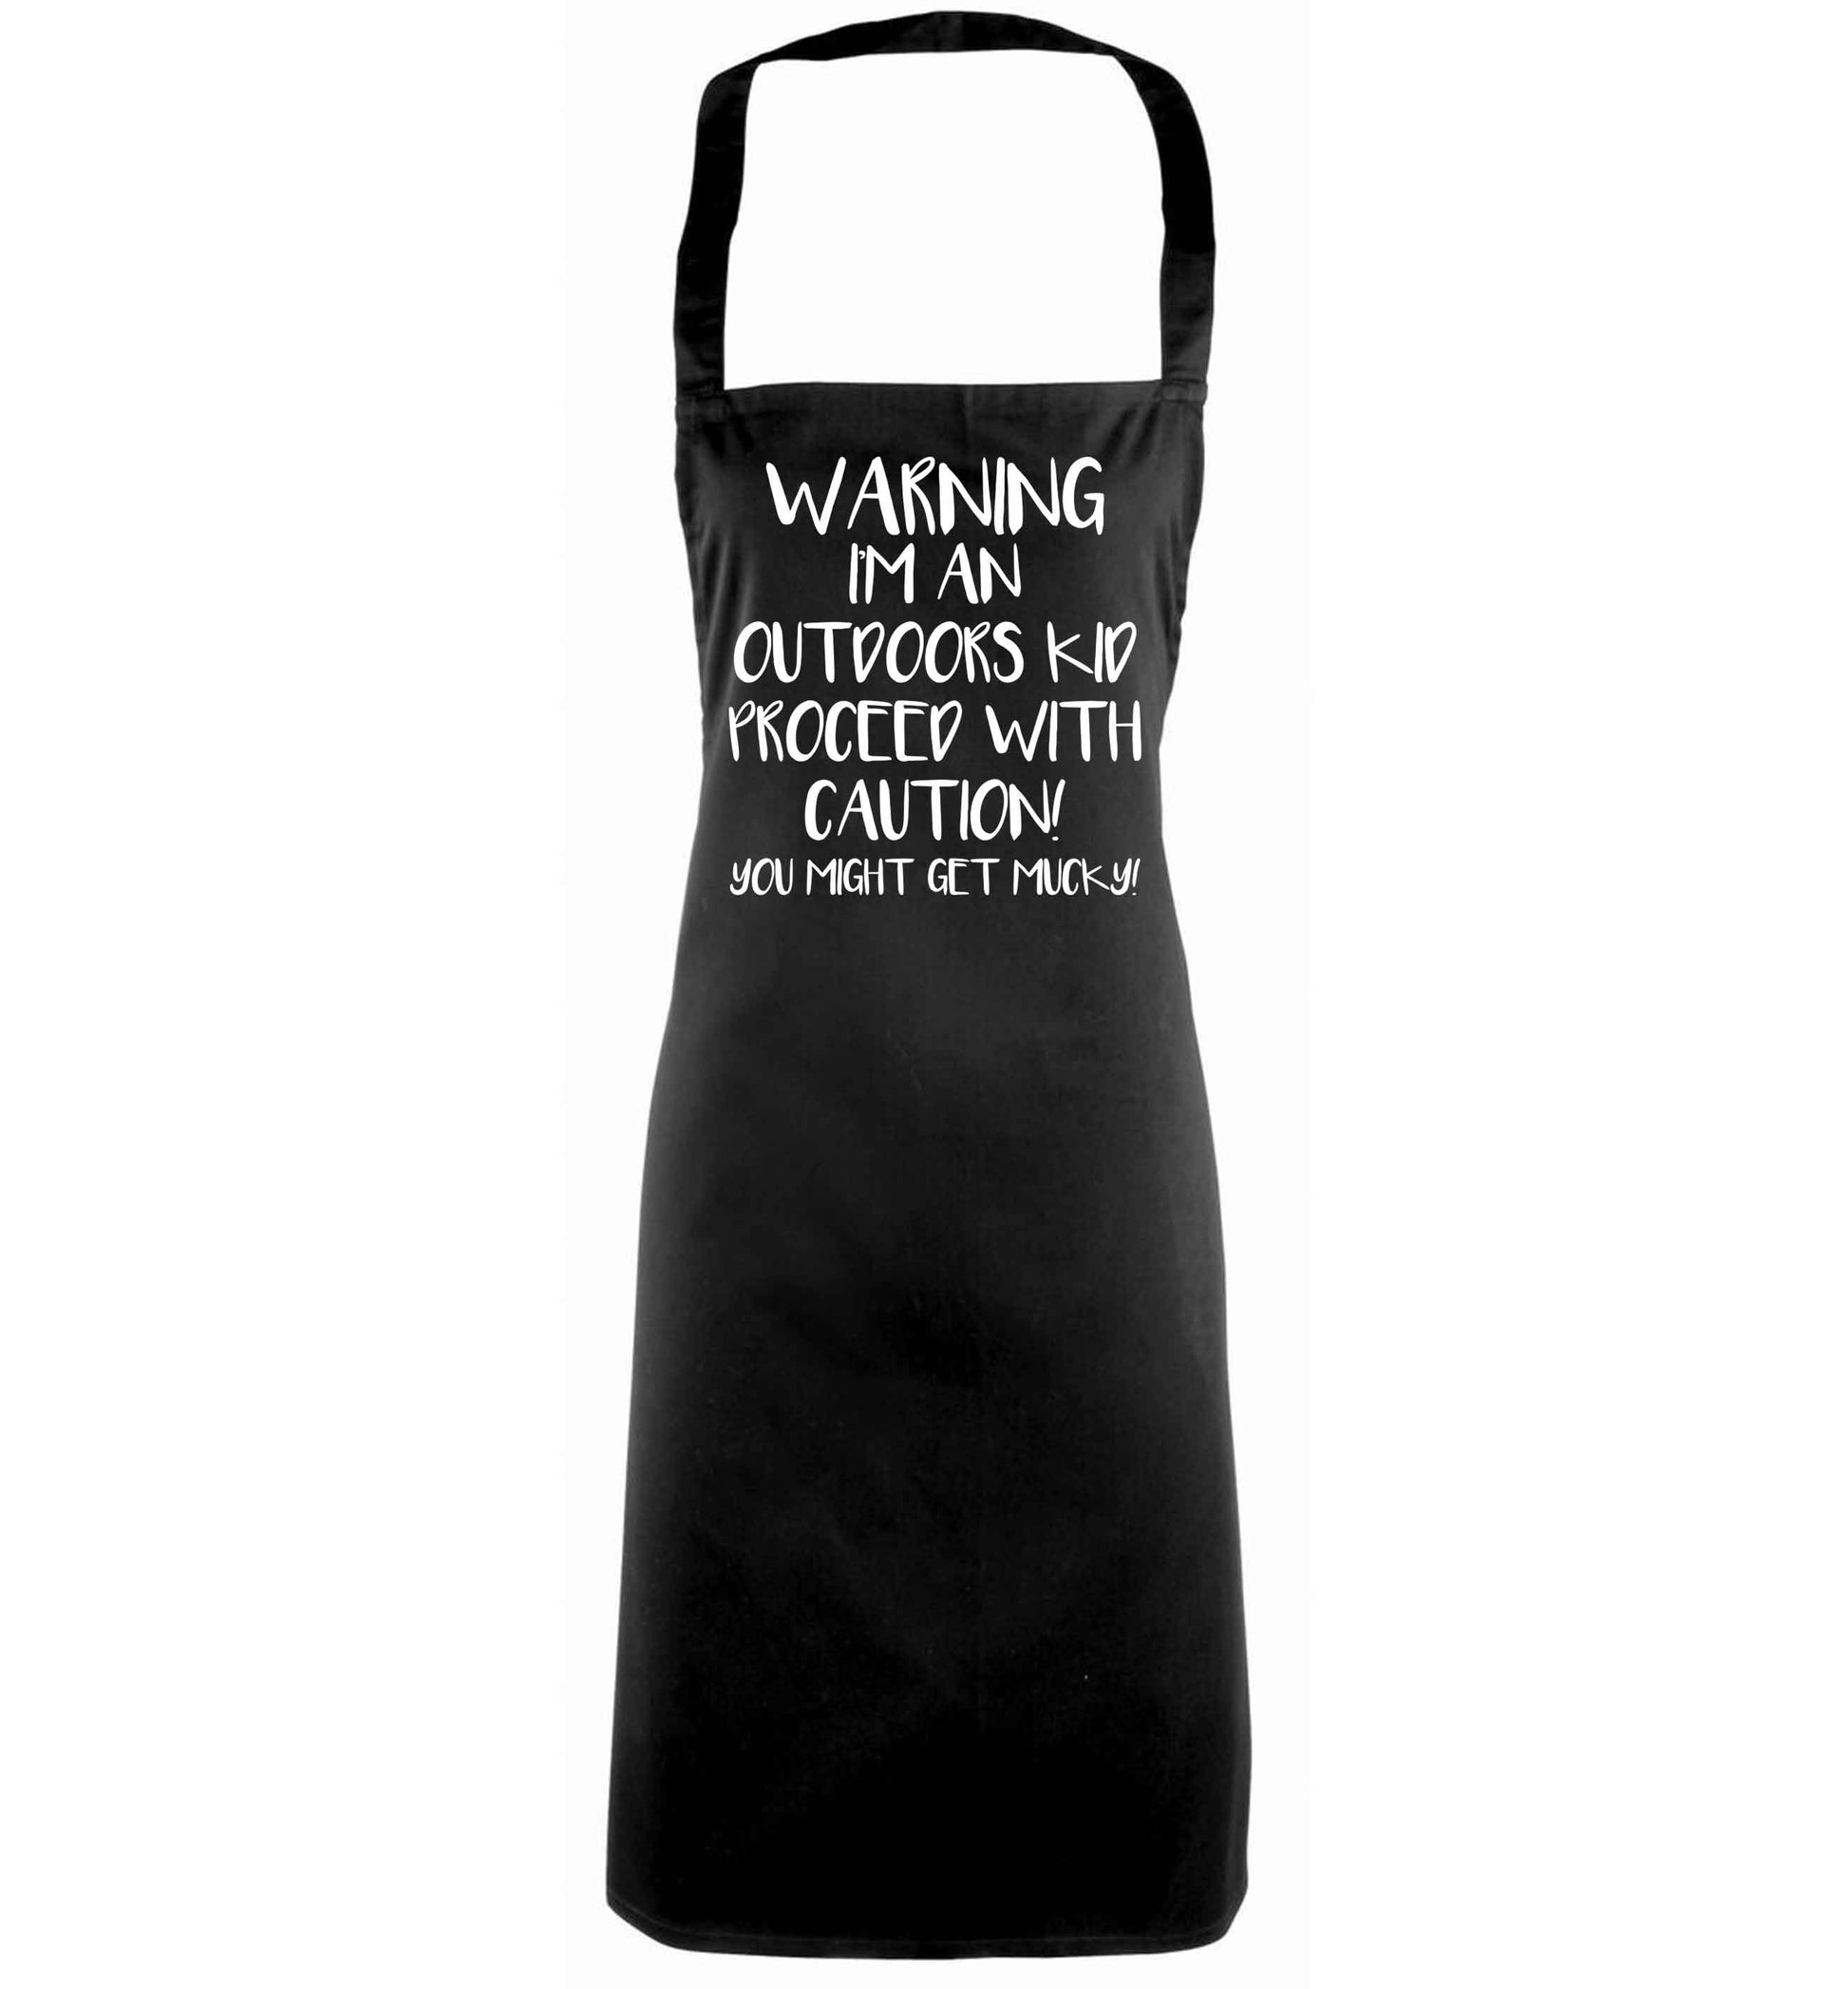 Warning I'm an outdoors kid! Proceed with caution you might get mucky black apron